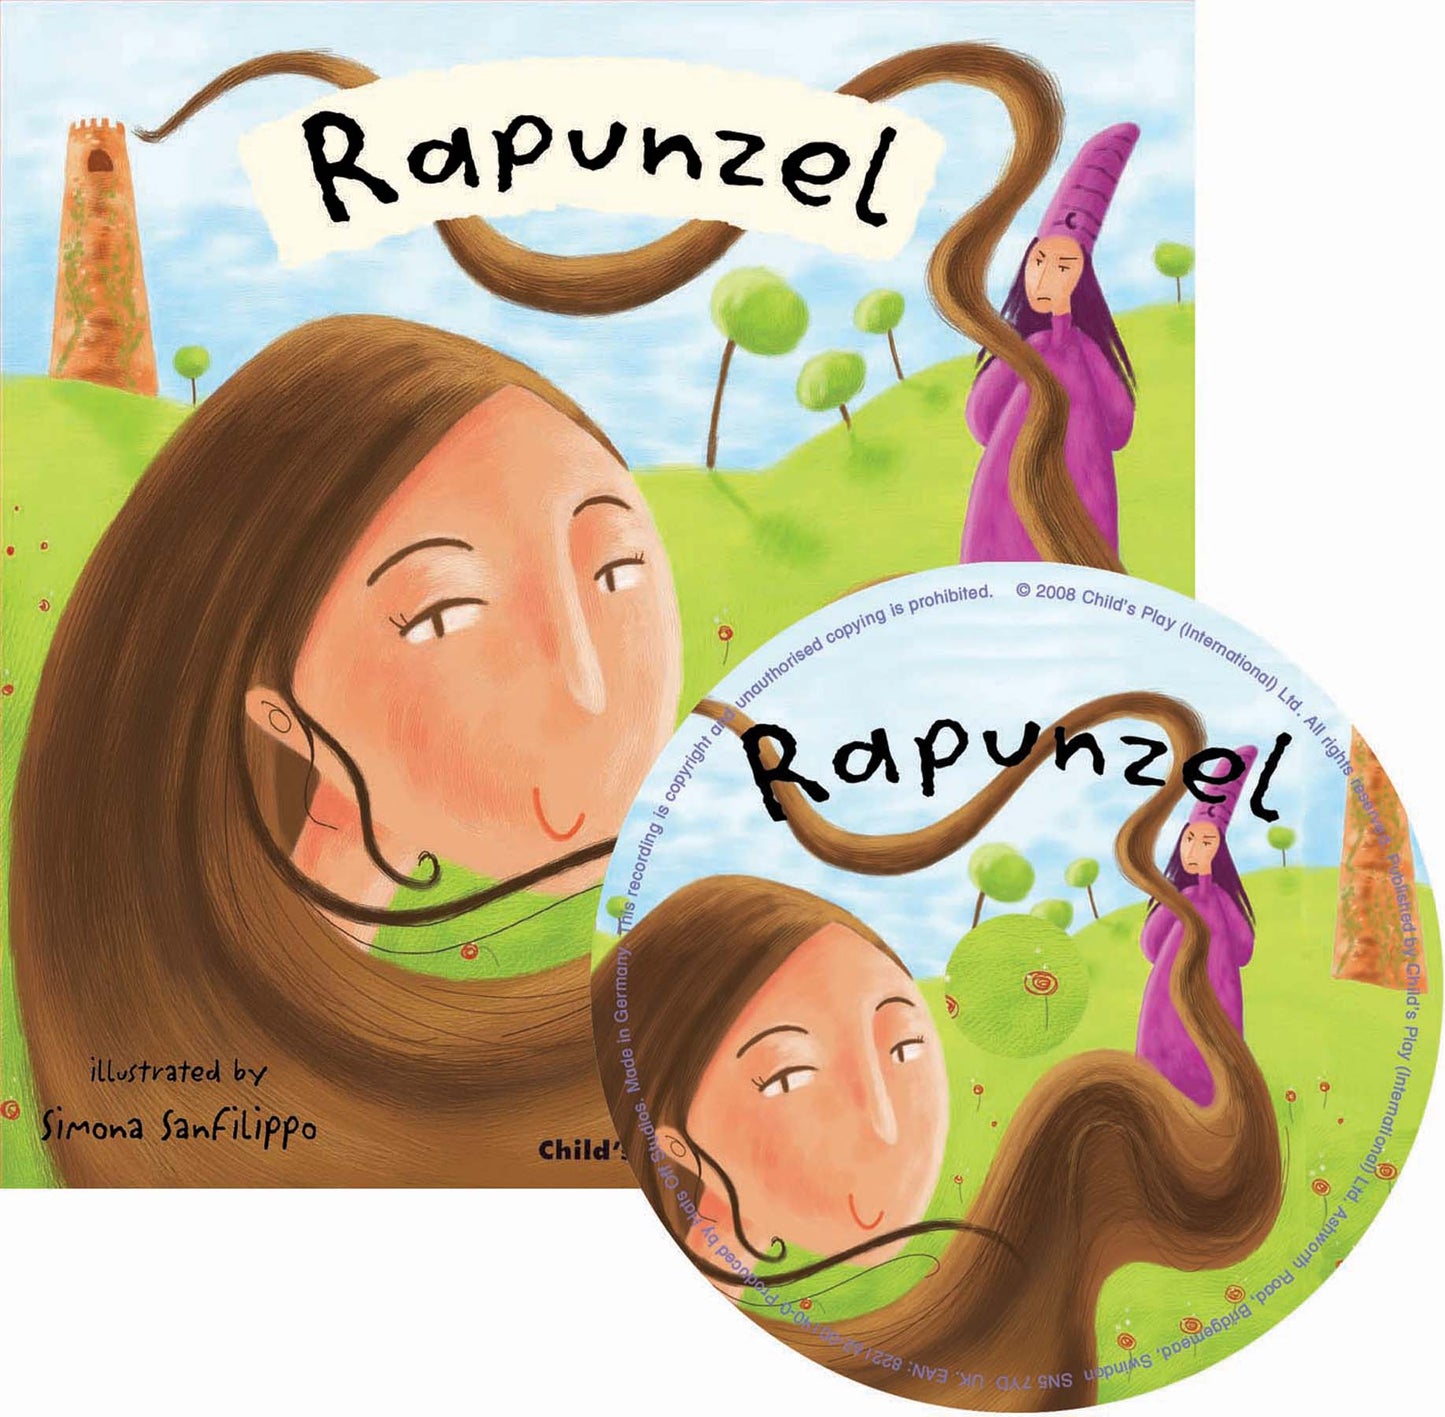 Rapunzel (Softcover with CD Edition)